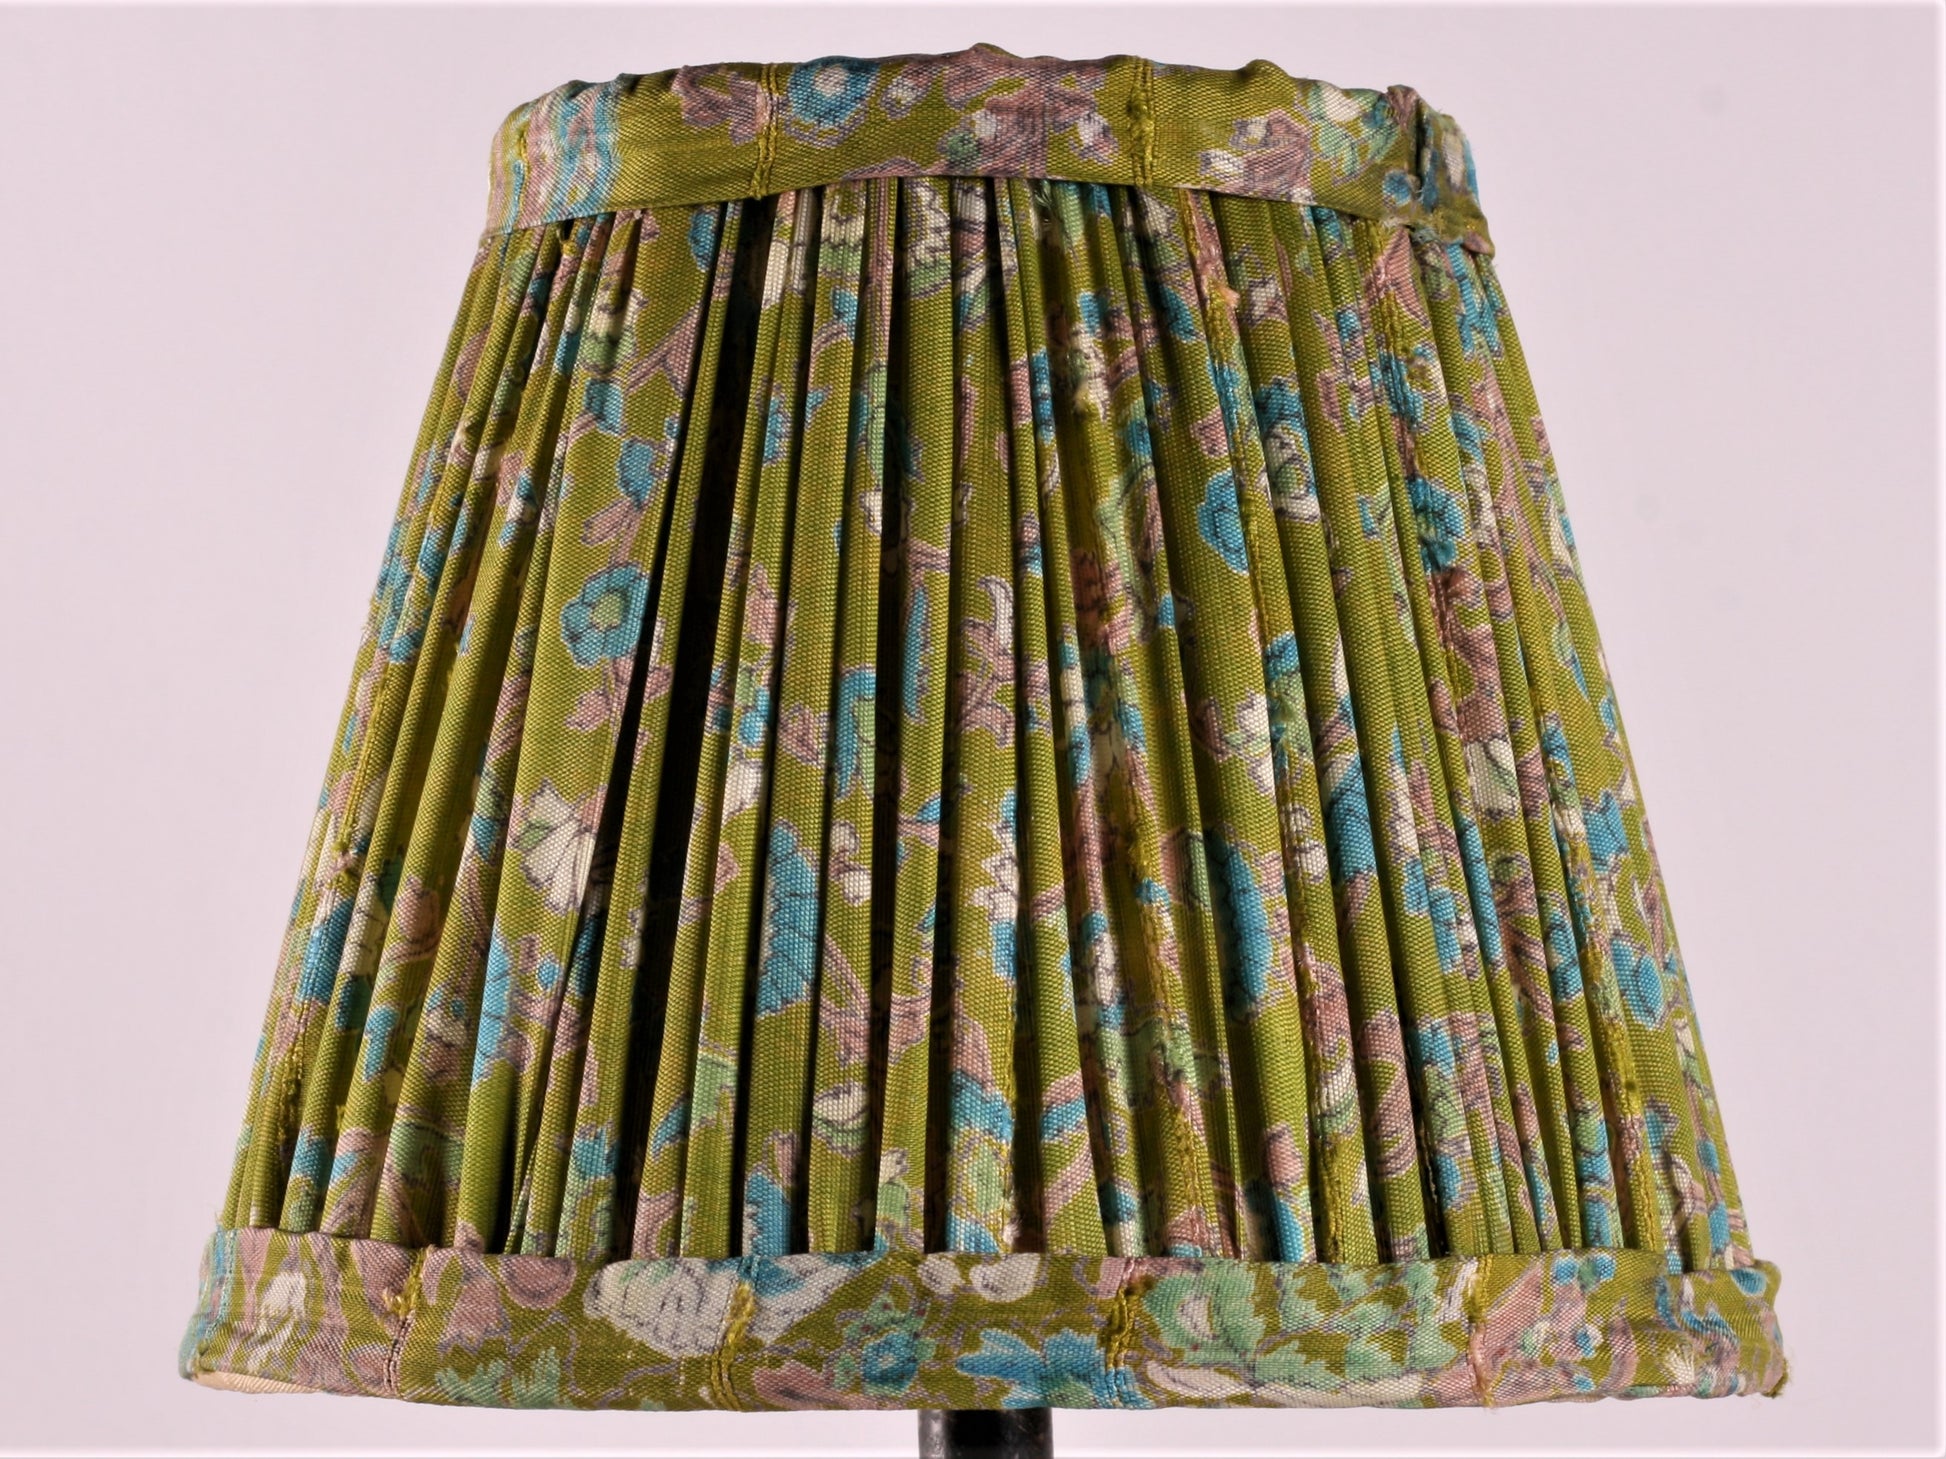 Bright Green With Small Blue Flower Silk Lampshade